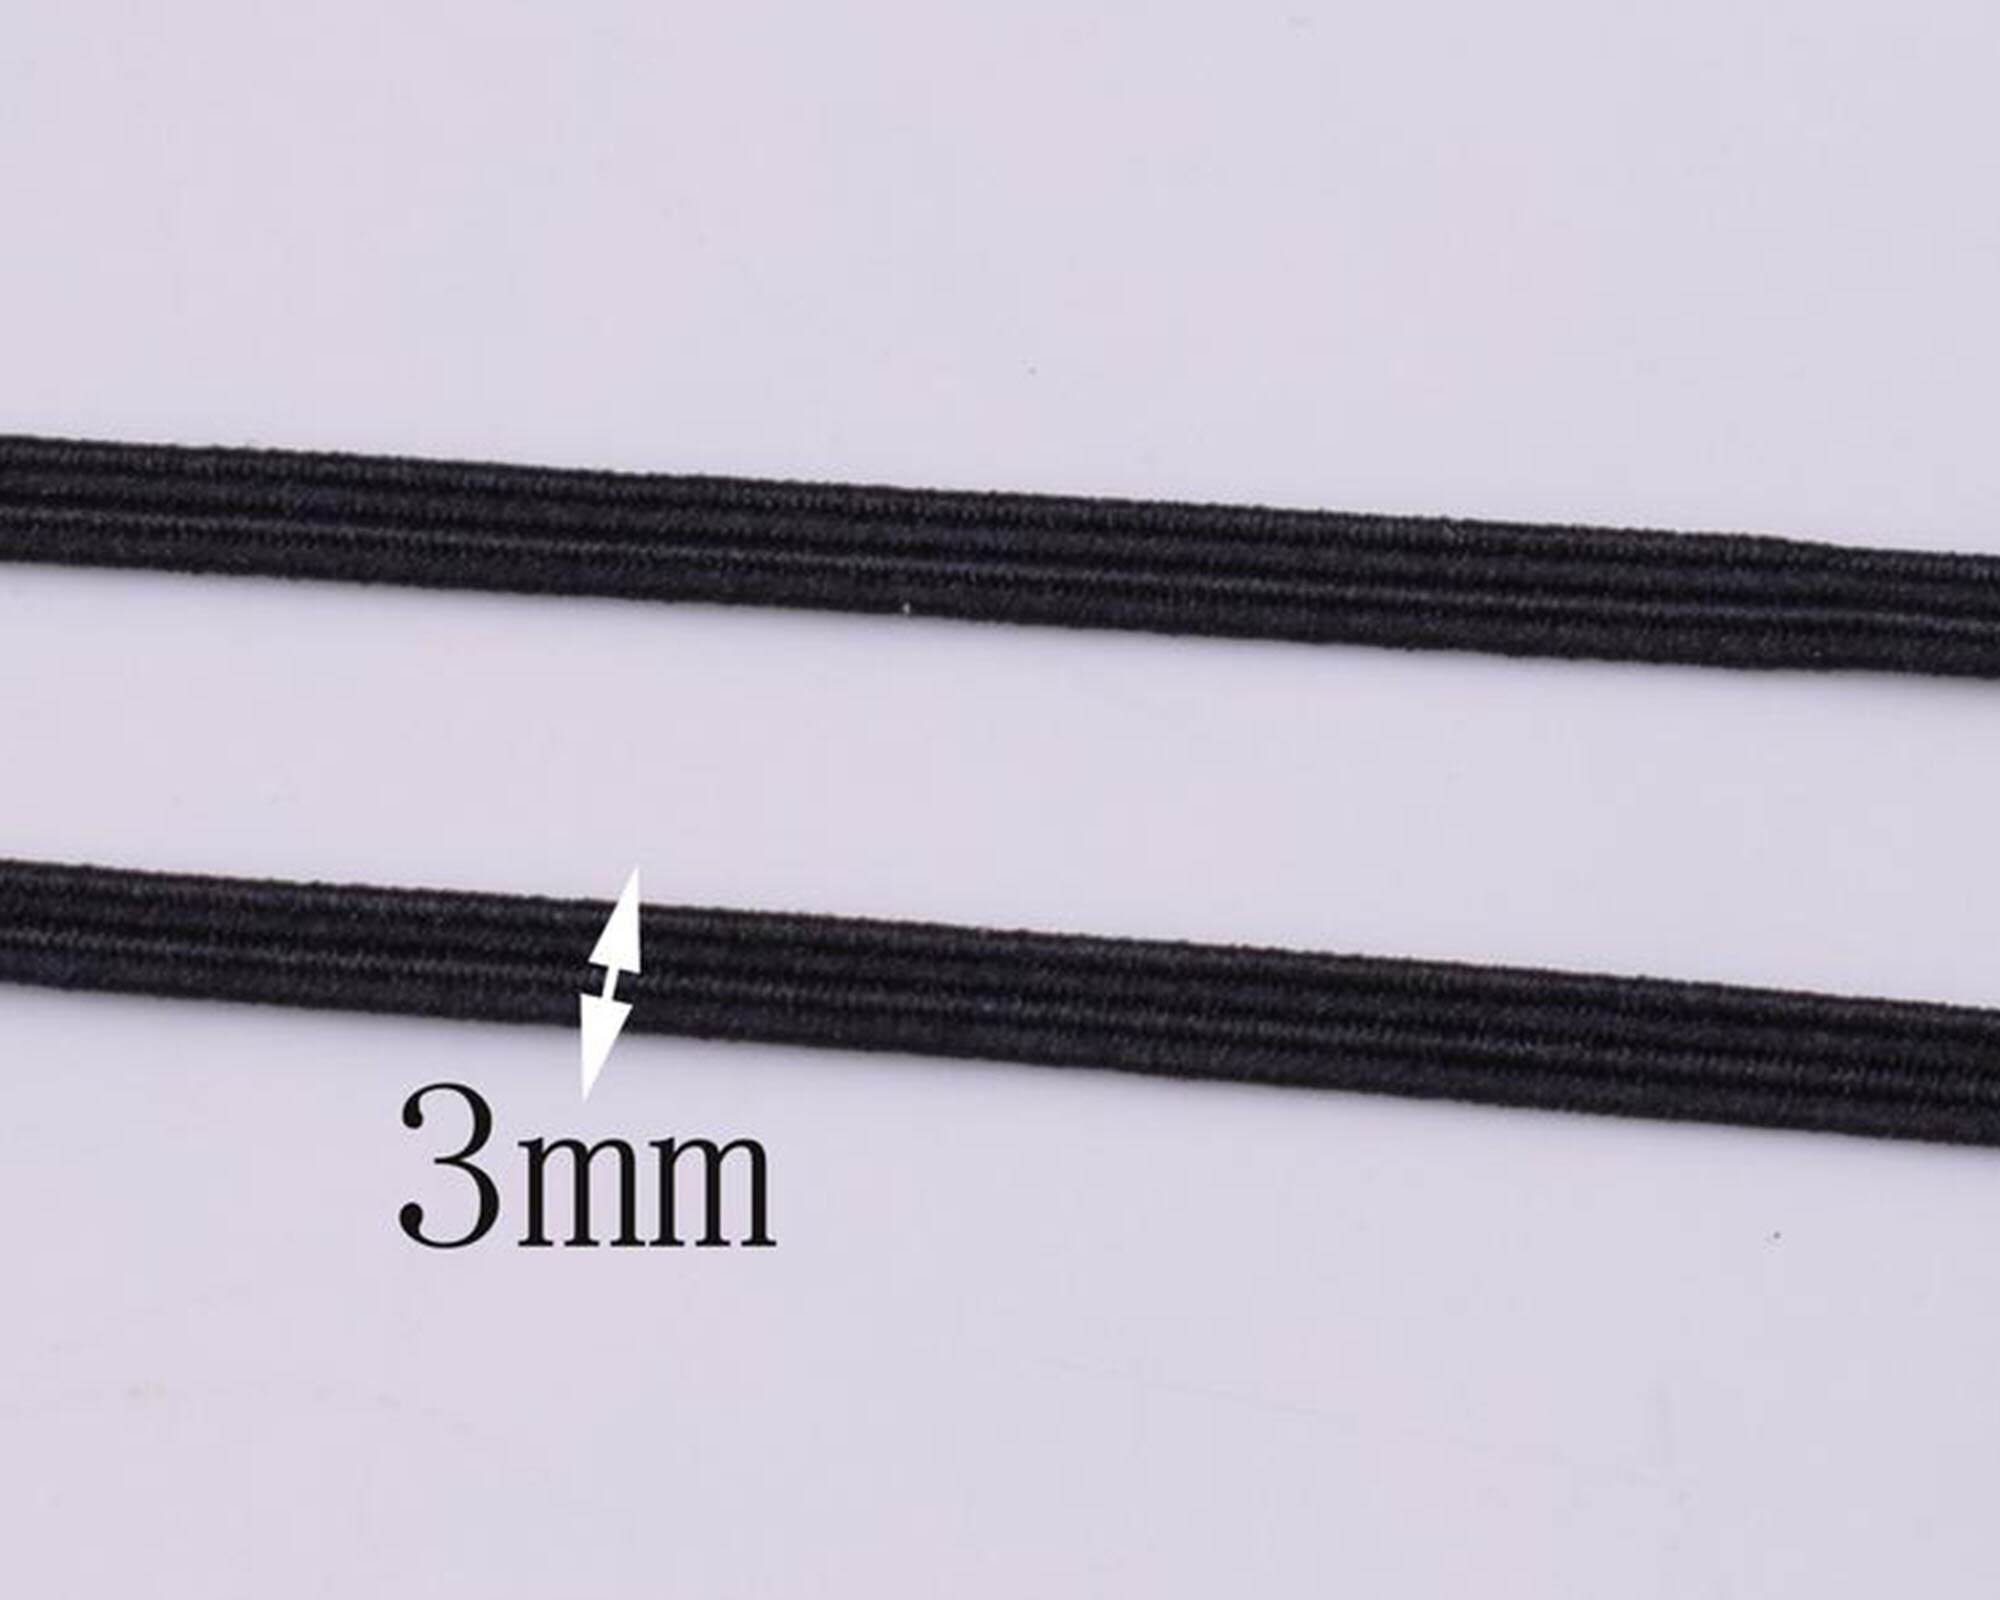 3mm Black Flat Elastic Cord for Face Mask Stretch Cord Elastic Band String  for Mouth Mask Craft DIY Sewing Supplies Jewelry Making,clothing 